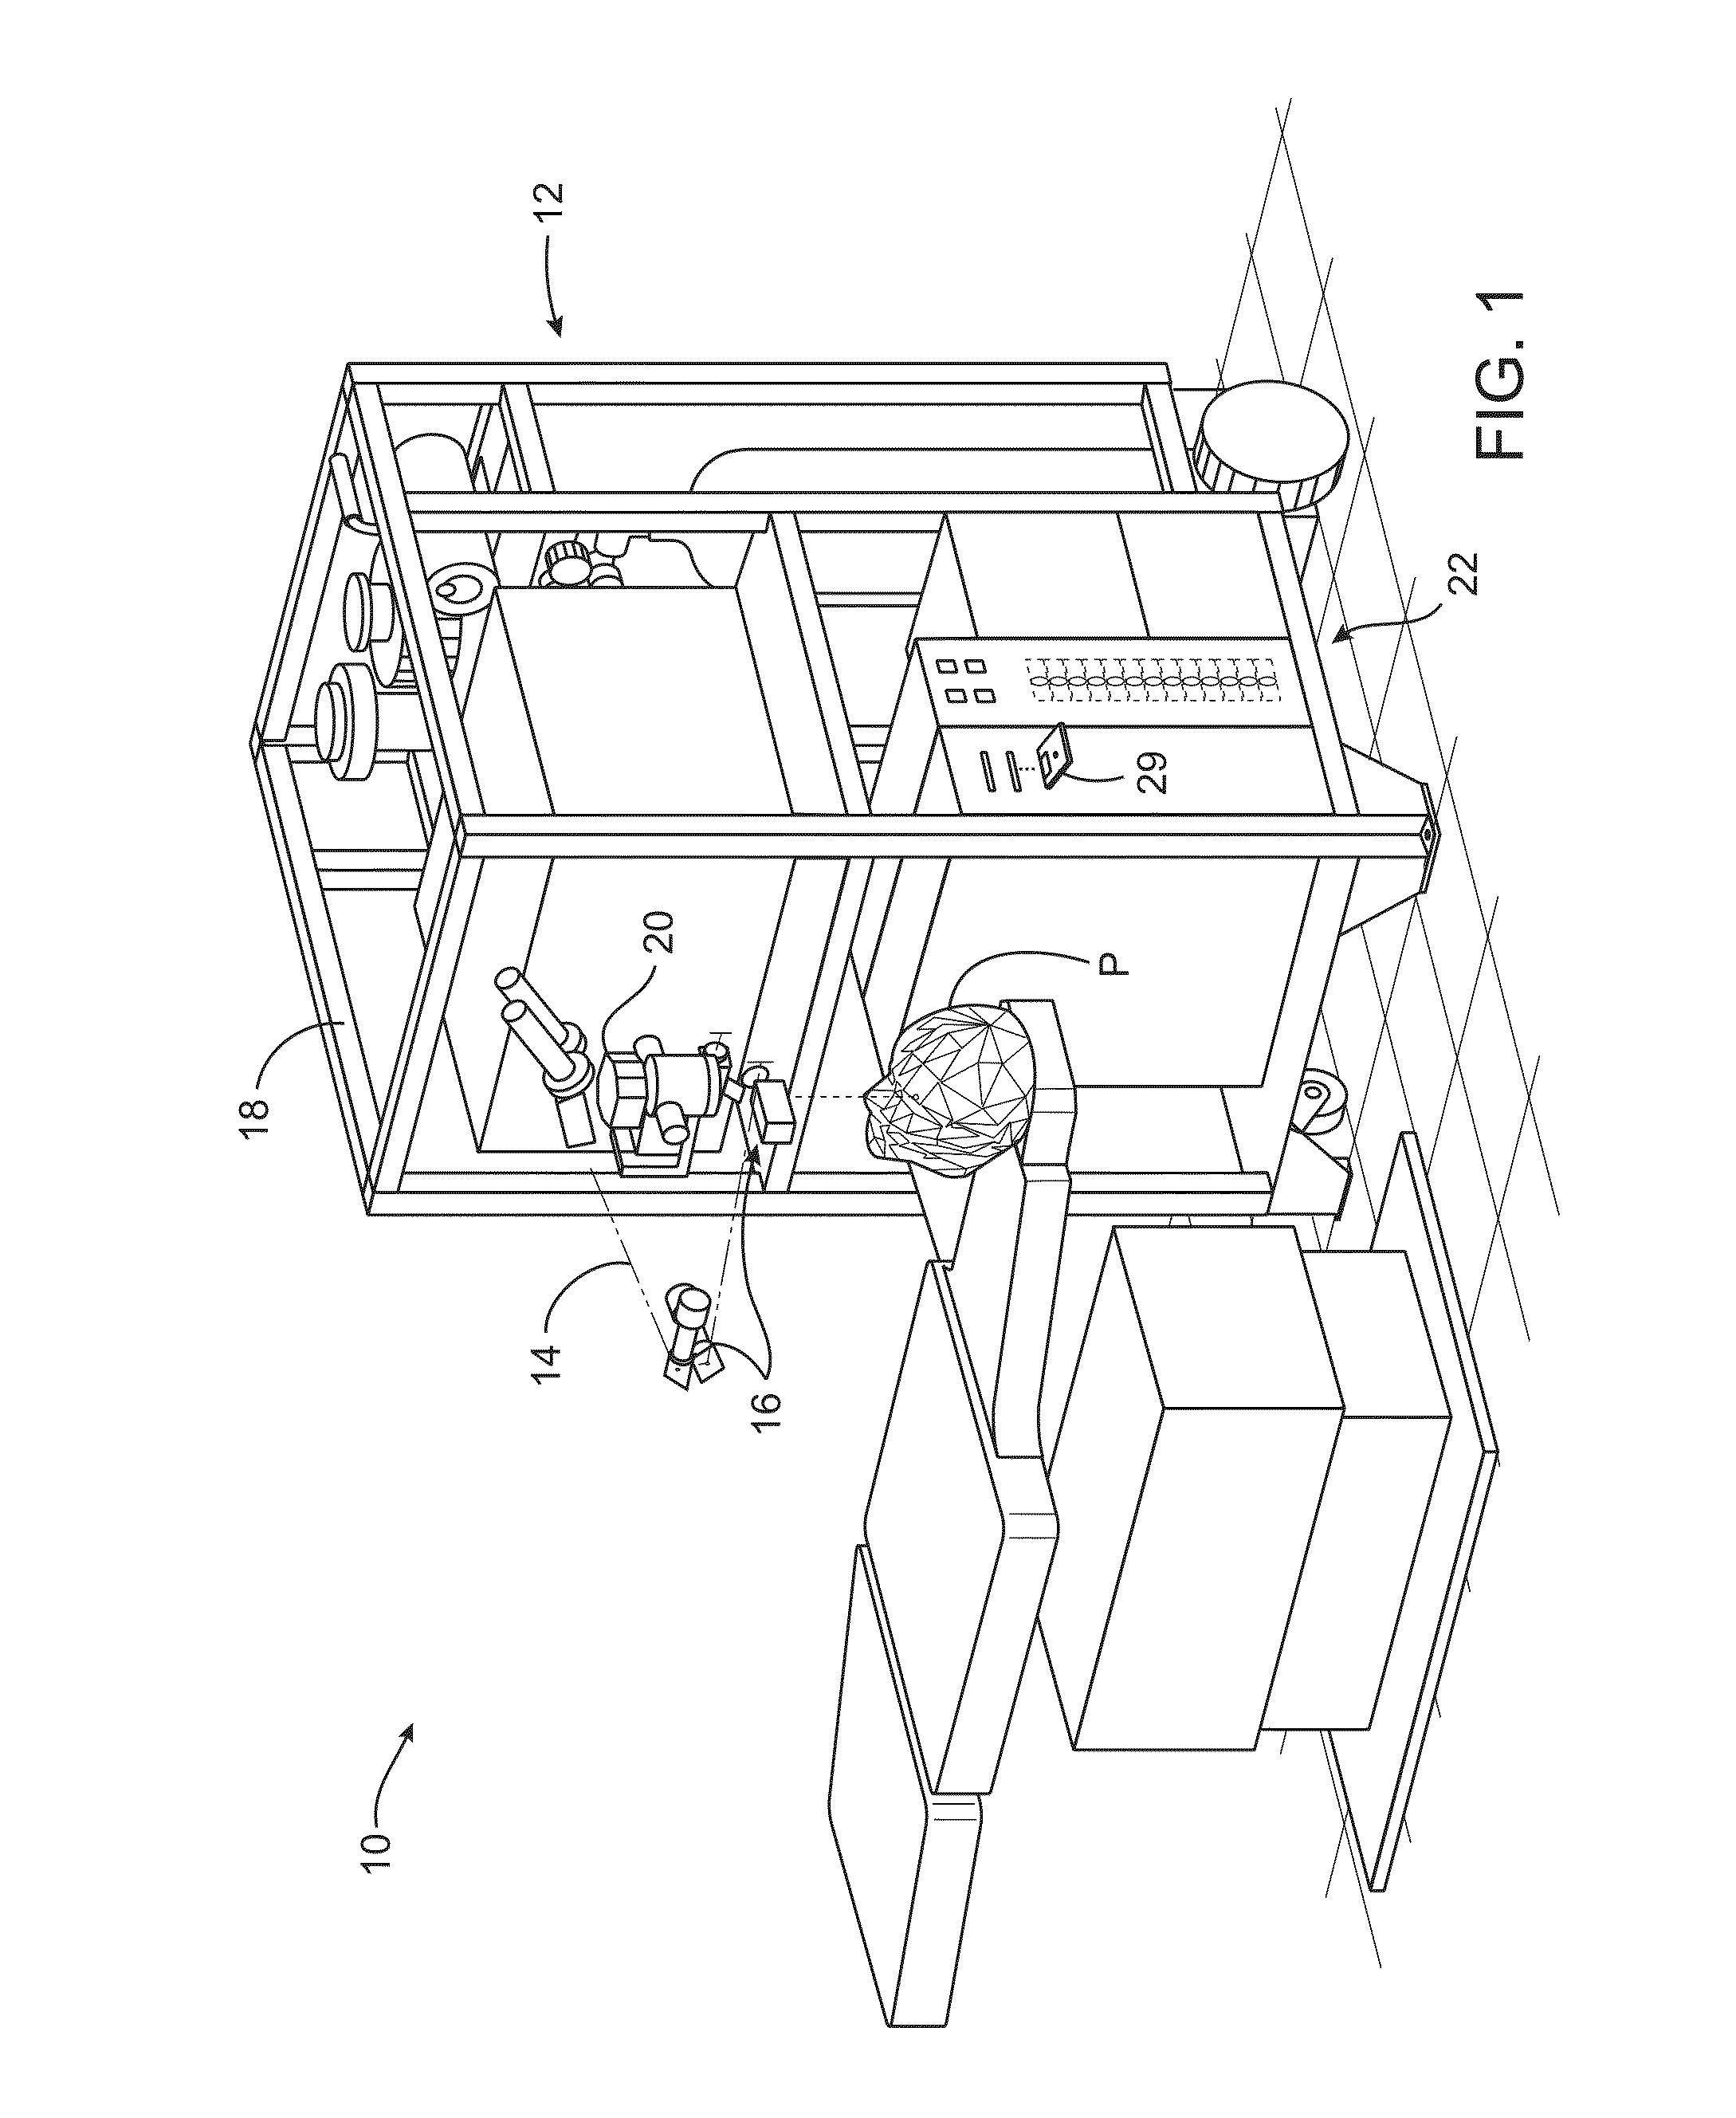 Vergence weighting systems and methods for treatment of presbyopia and other vision conditions